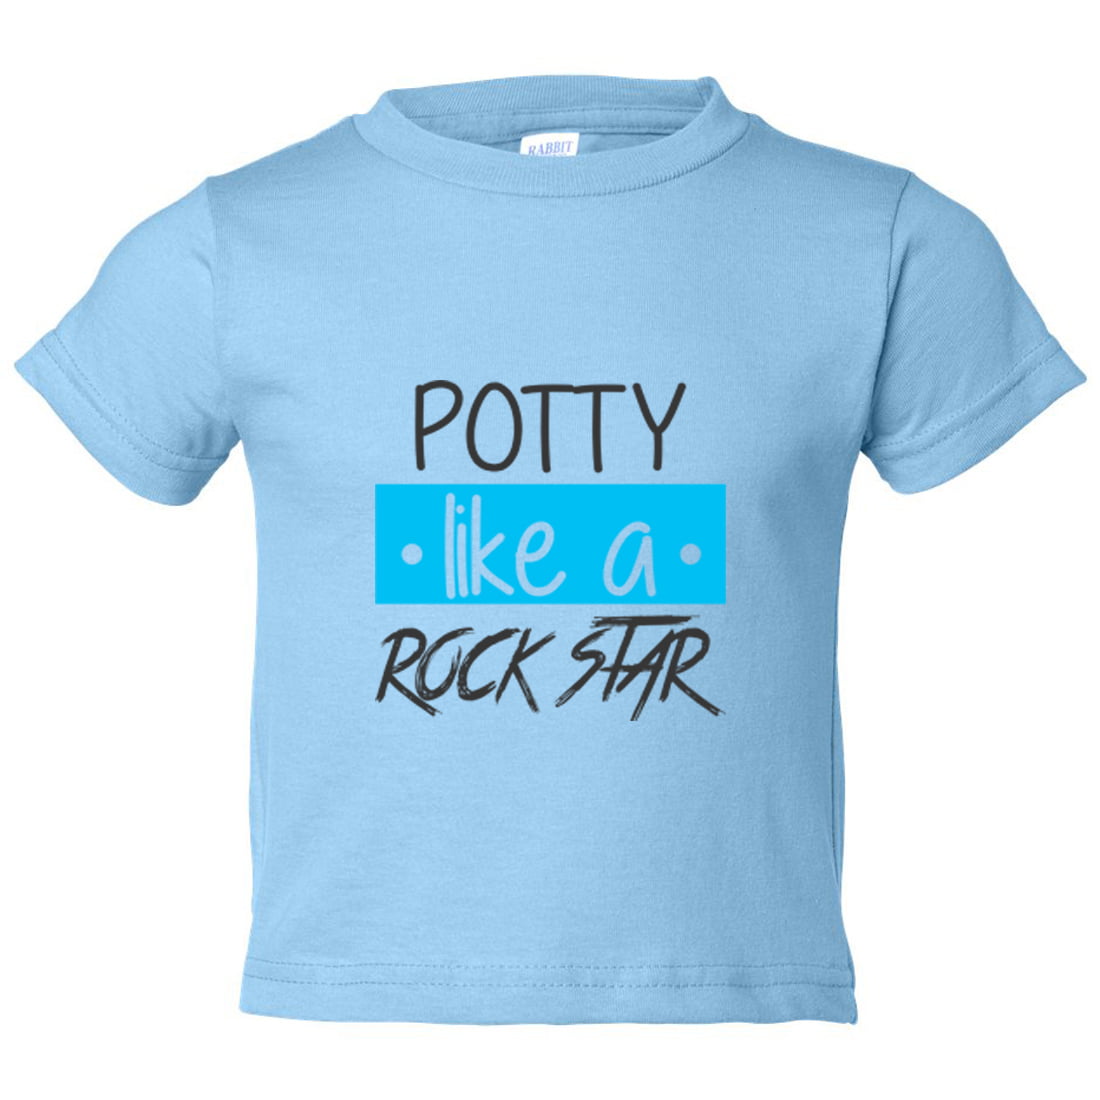 Rock Baby T-Shirt "Potty like a Rock Star" Funny Music Tee Gift 